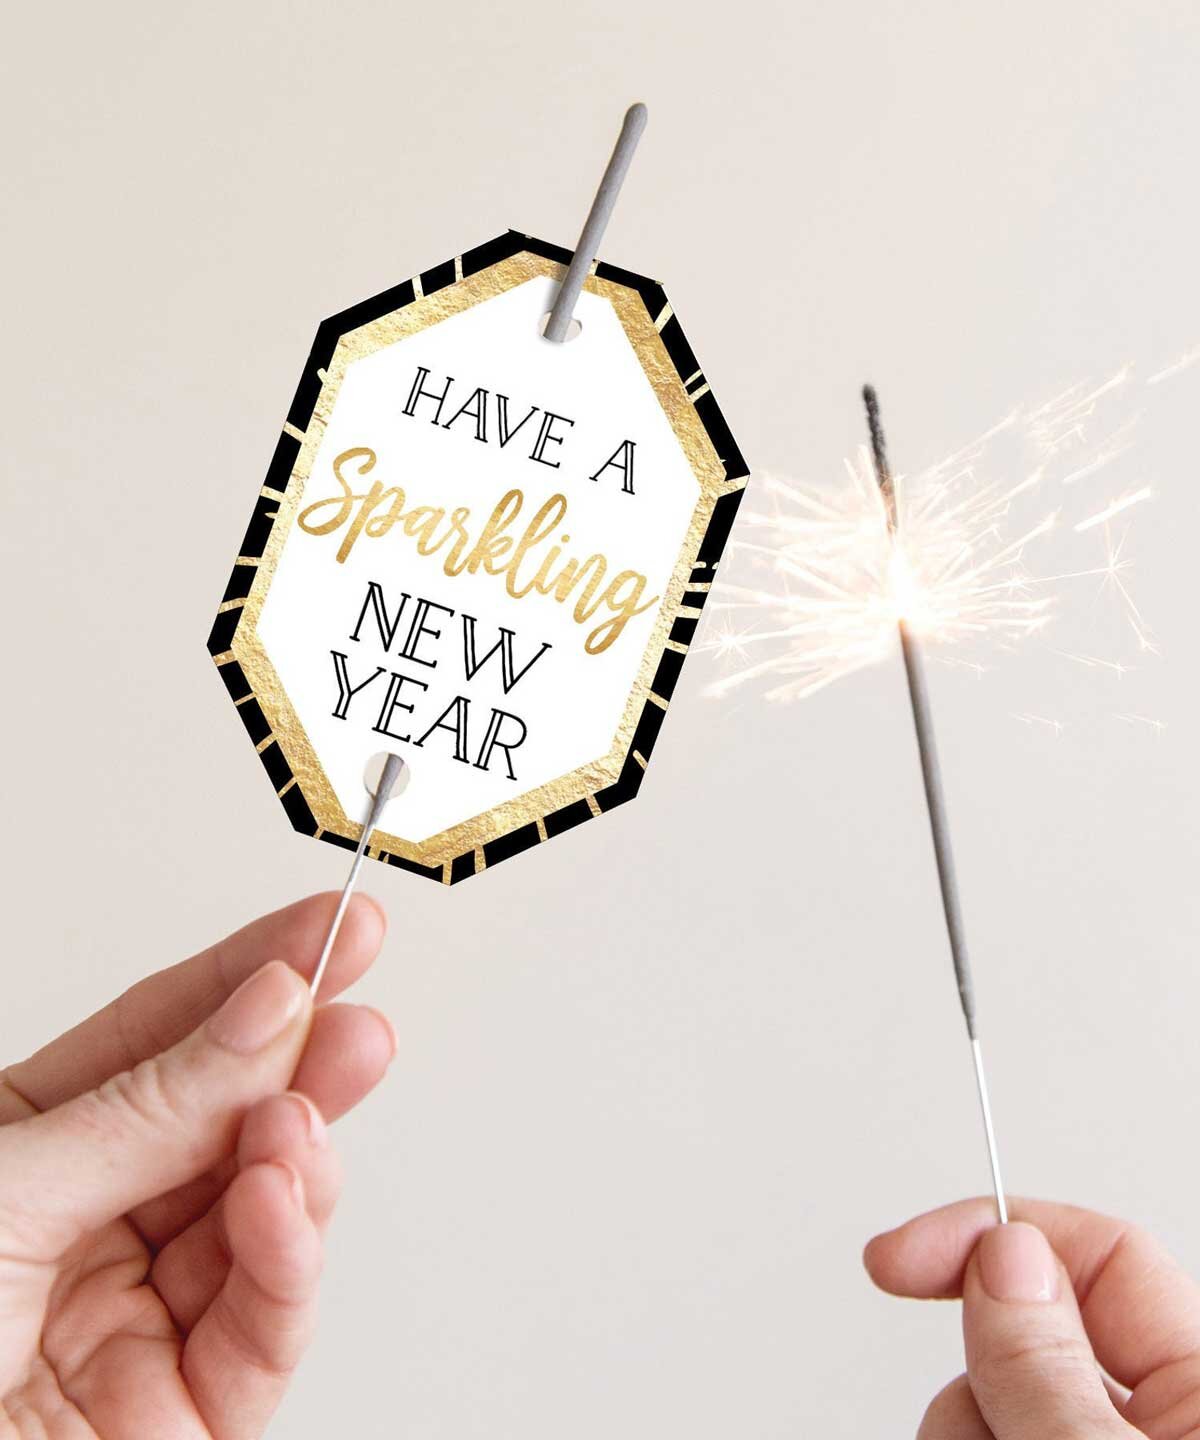 Sparkler Tag New Year 2022